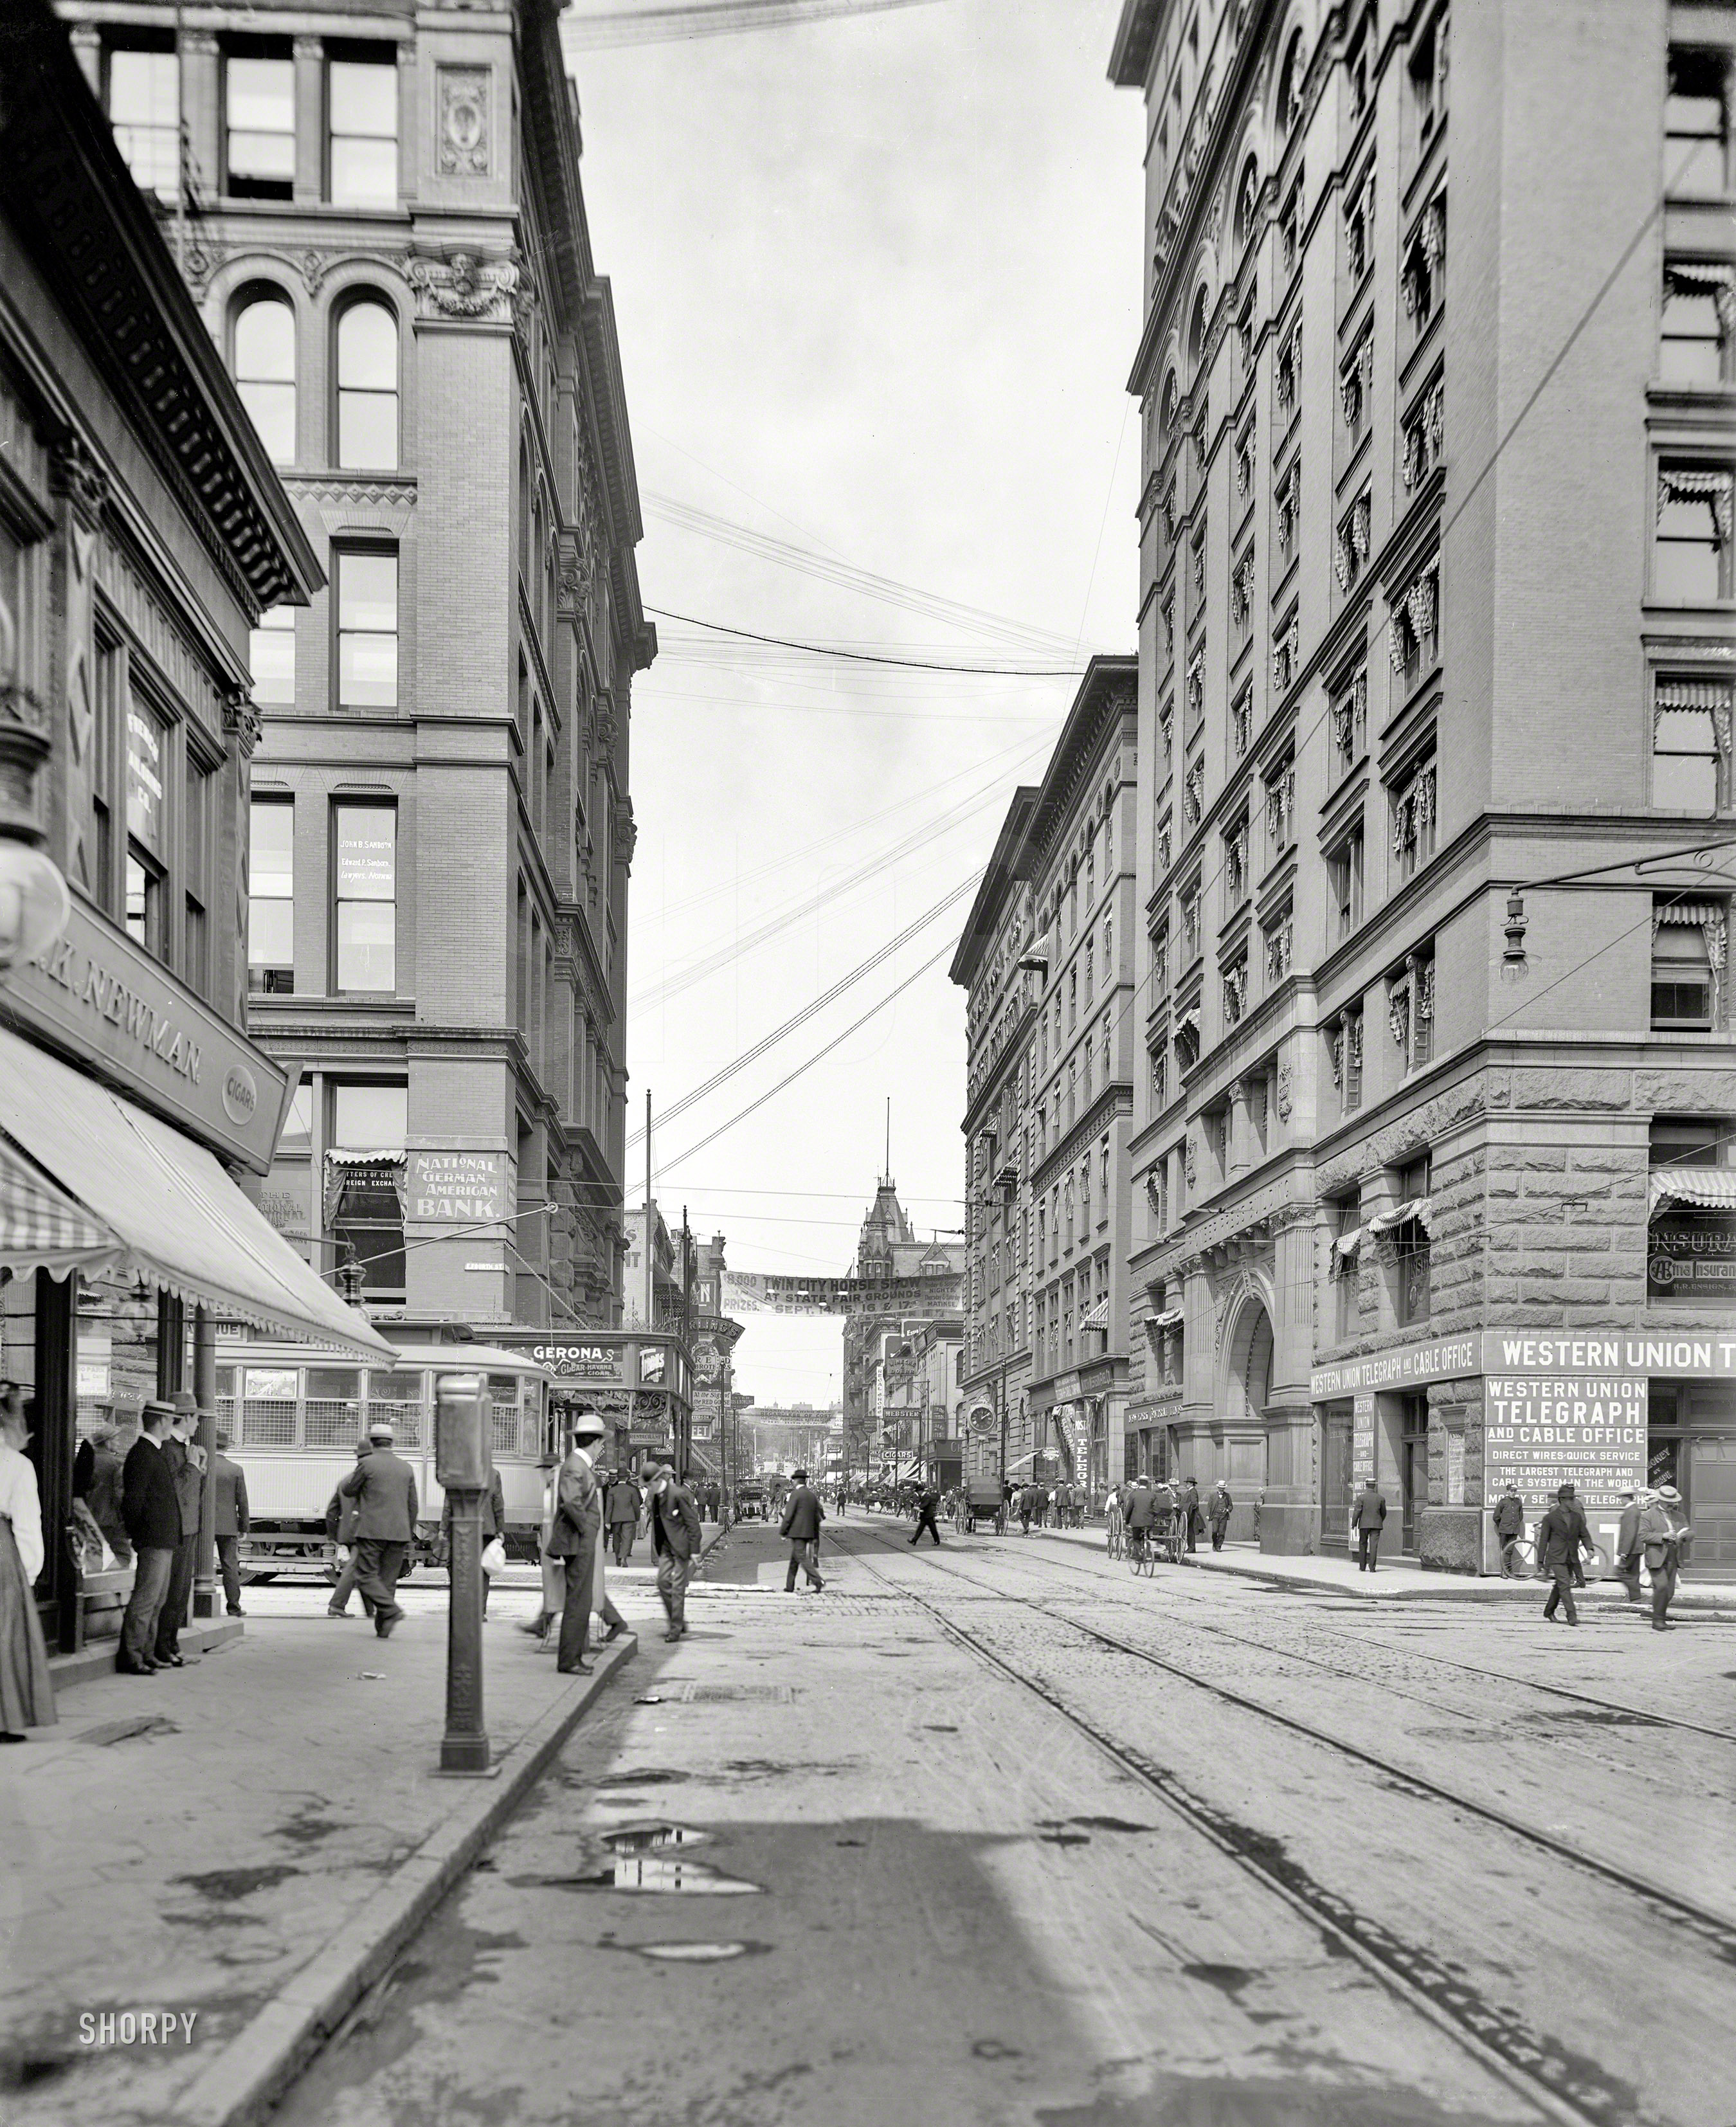 1904. "Robert Street and Pioneer Press -- St. Paul, Minnesota." 8x10 inch dry plate glass negative, Detroit Photographic Company. View full size.